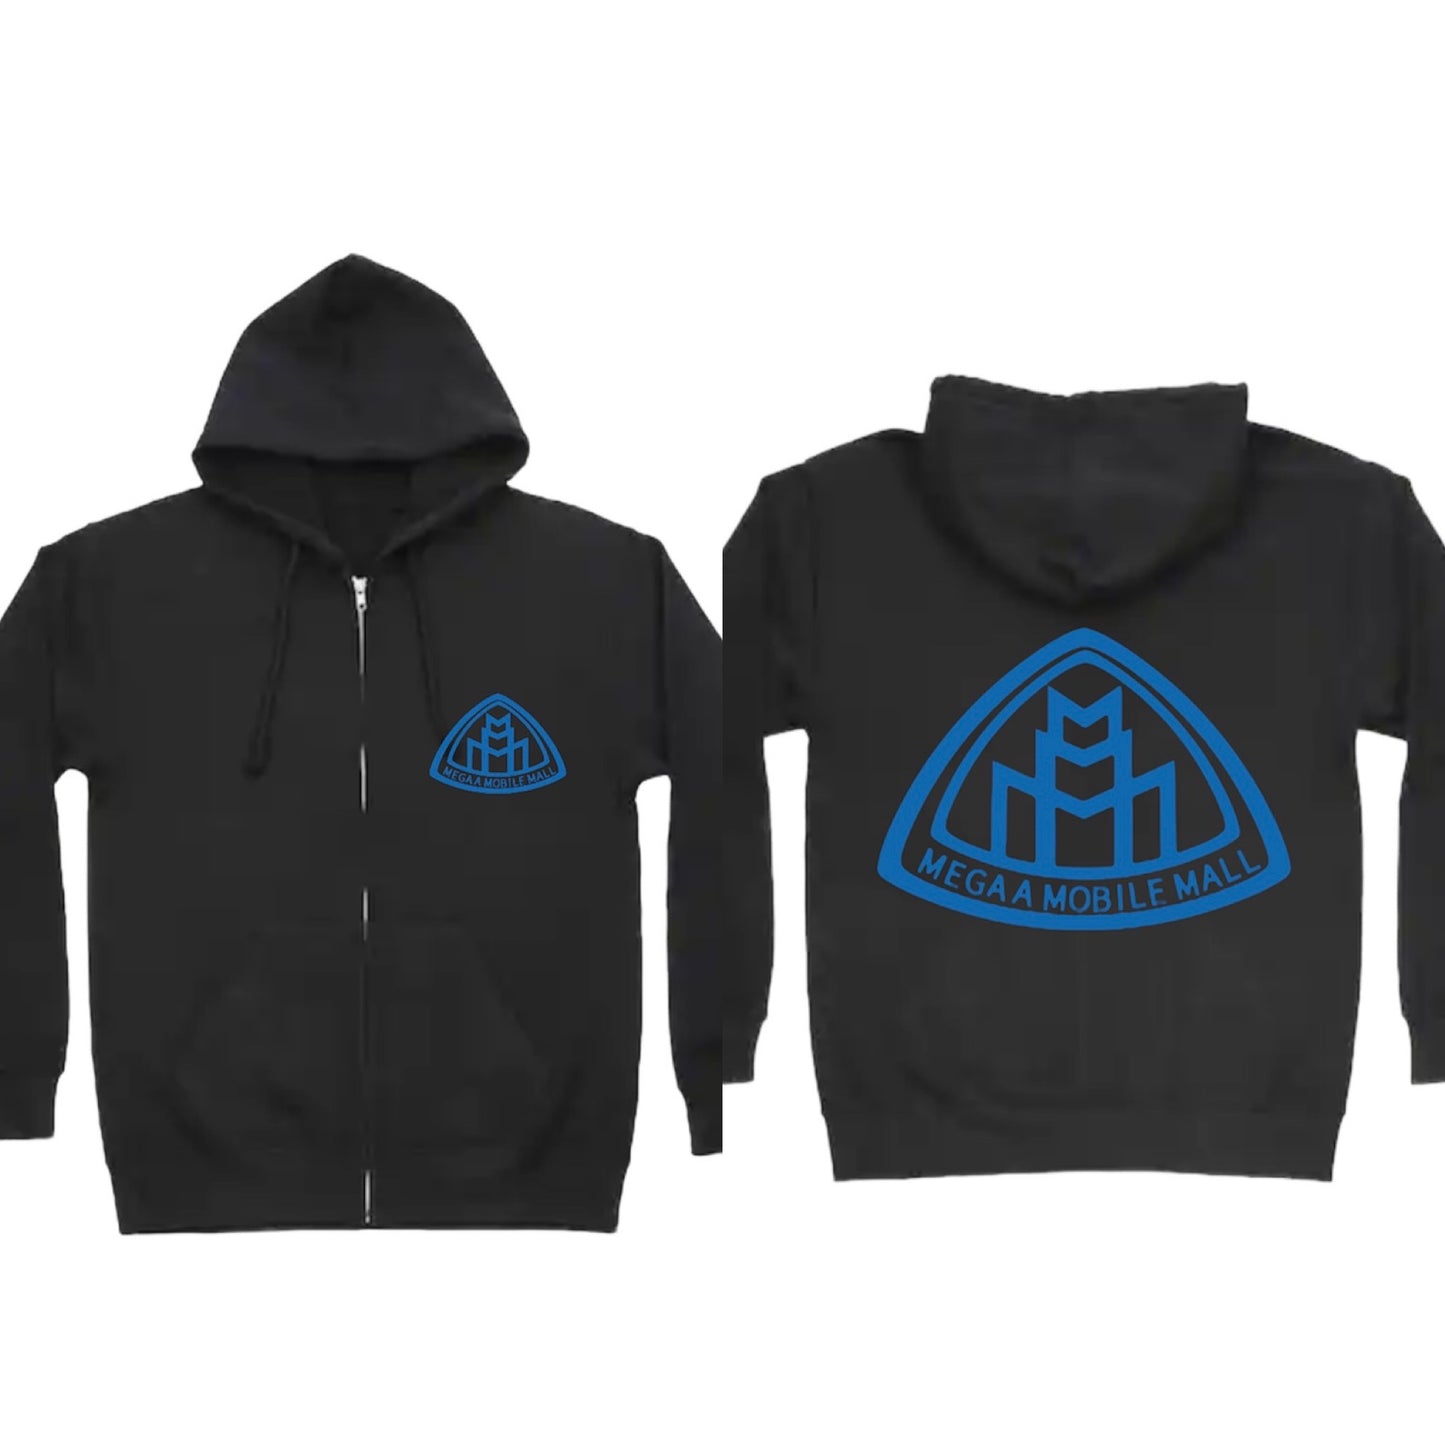 megaamobilemall black zip up hoodie with blue logo color